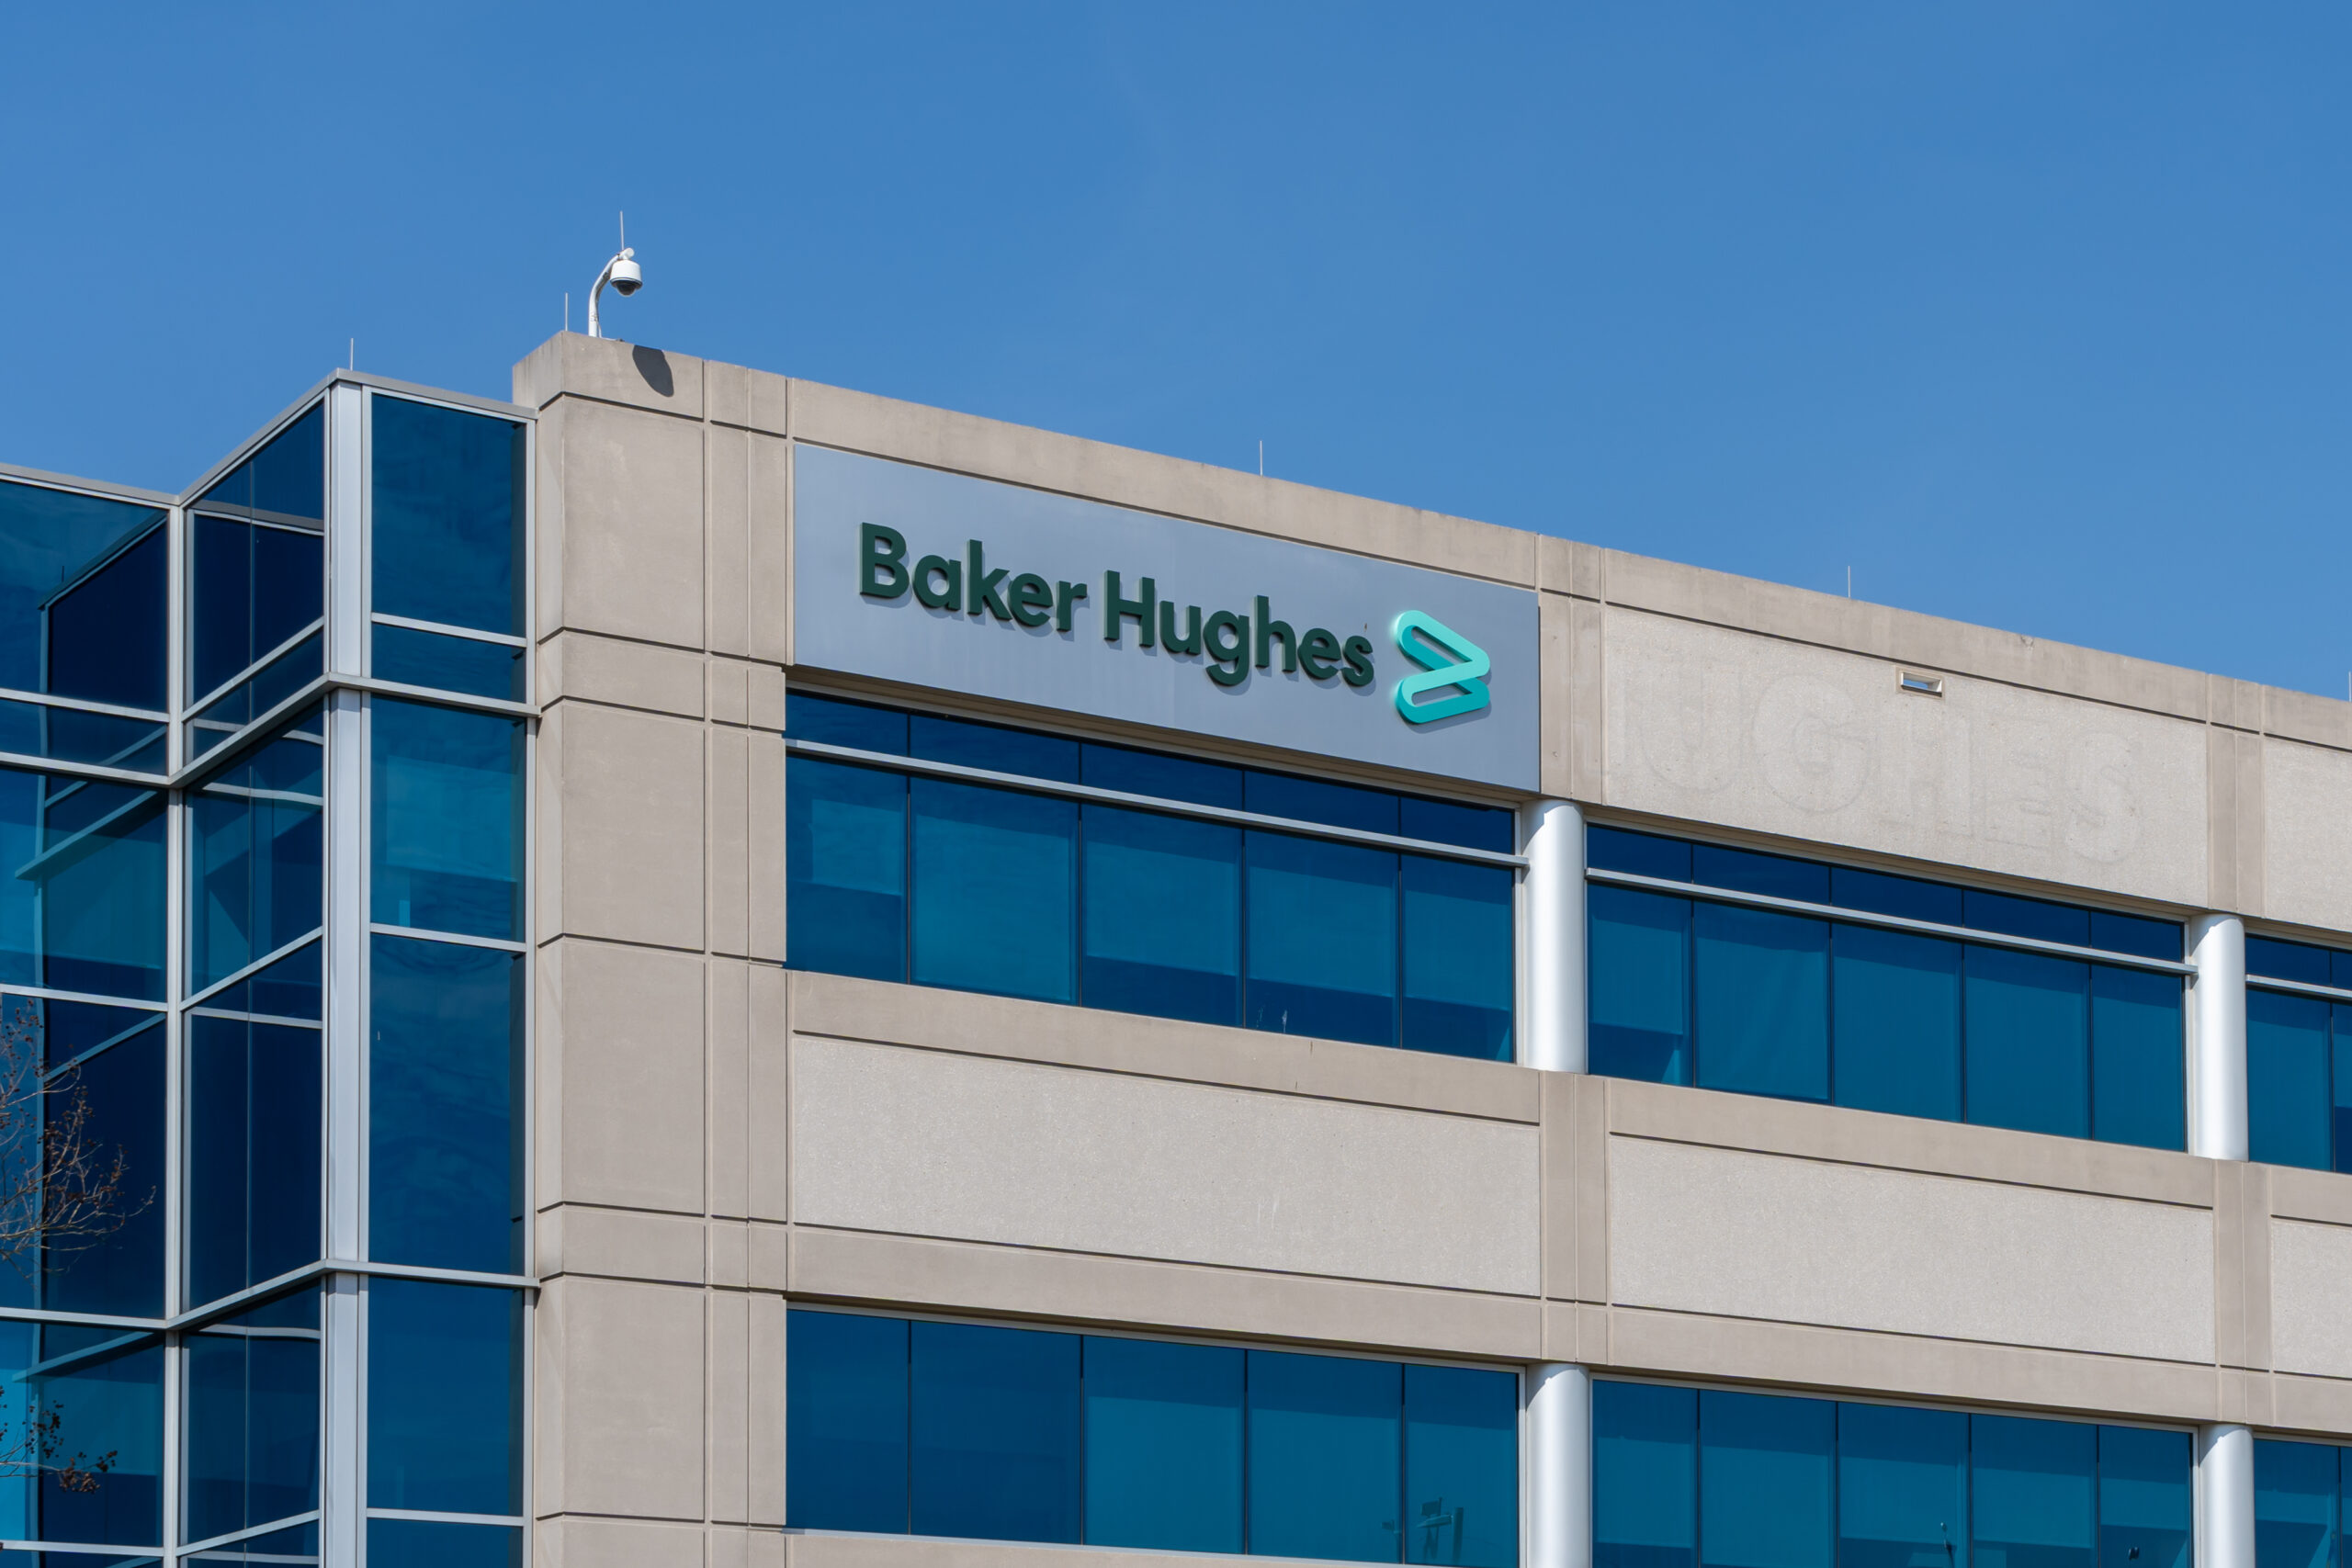 Baker Hughes opens a new training centre for young talents in Massa The Apuane Learning Center, the new training facility, will also be open to local businesses and will collaborate with ITS Prime and the universities of Florence and Pisa.